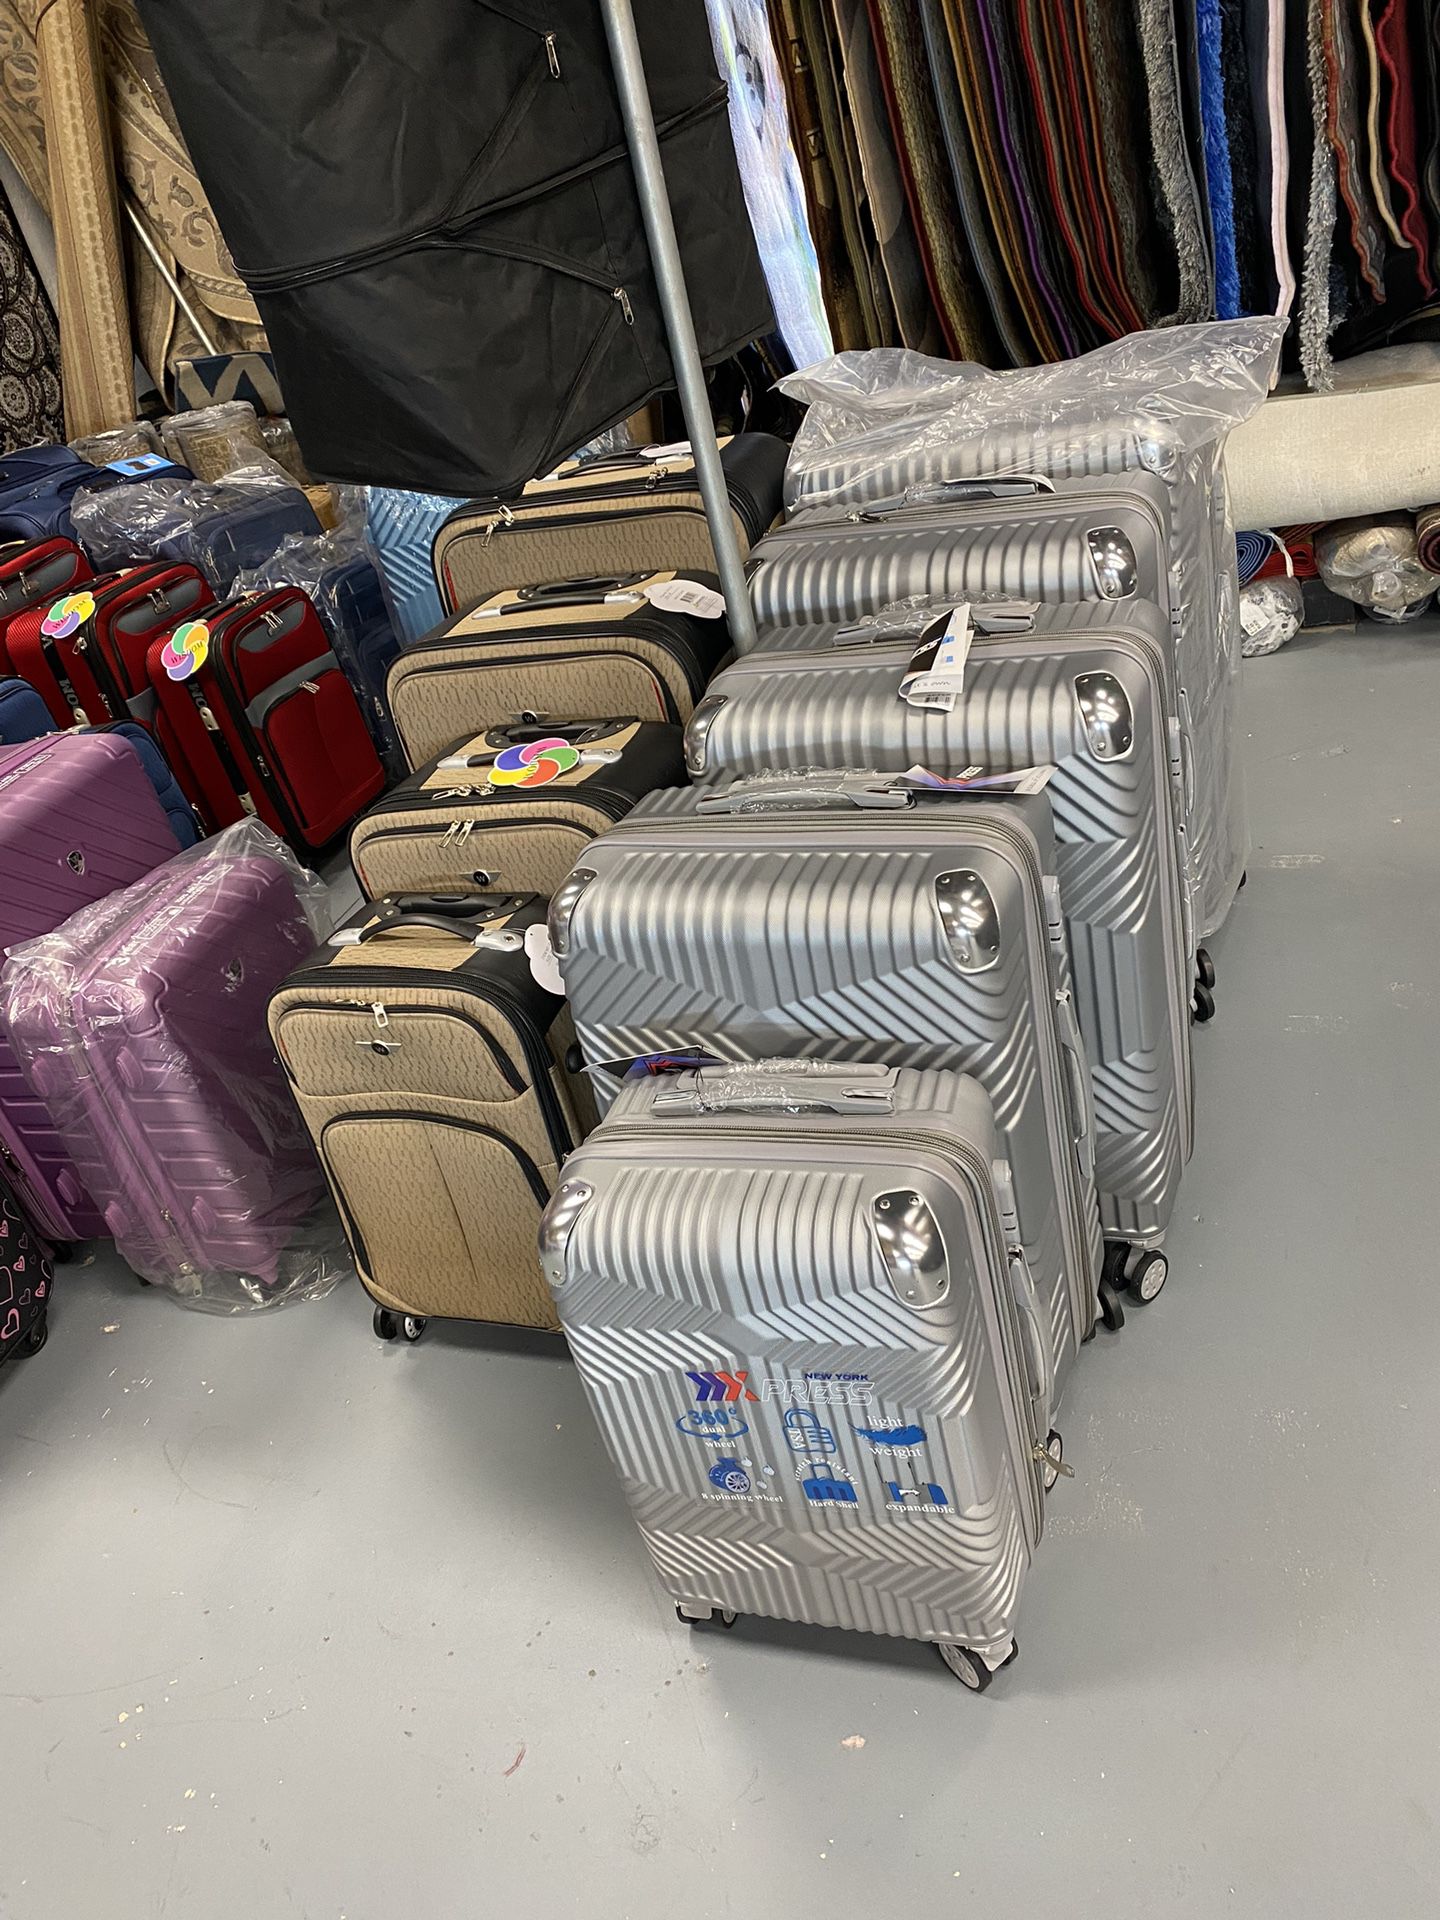 Luggage All Size Available for Sale in Phoenix, AZ - OfferUp